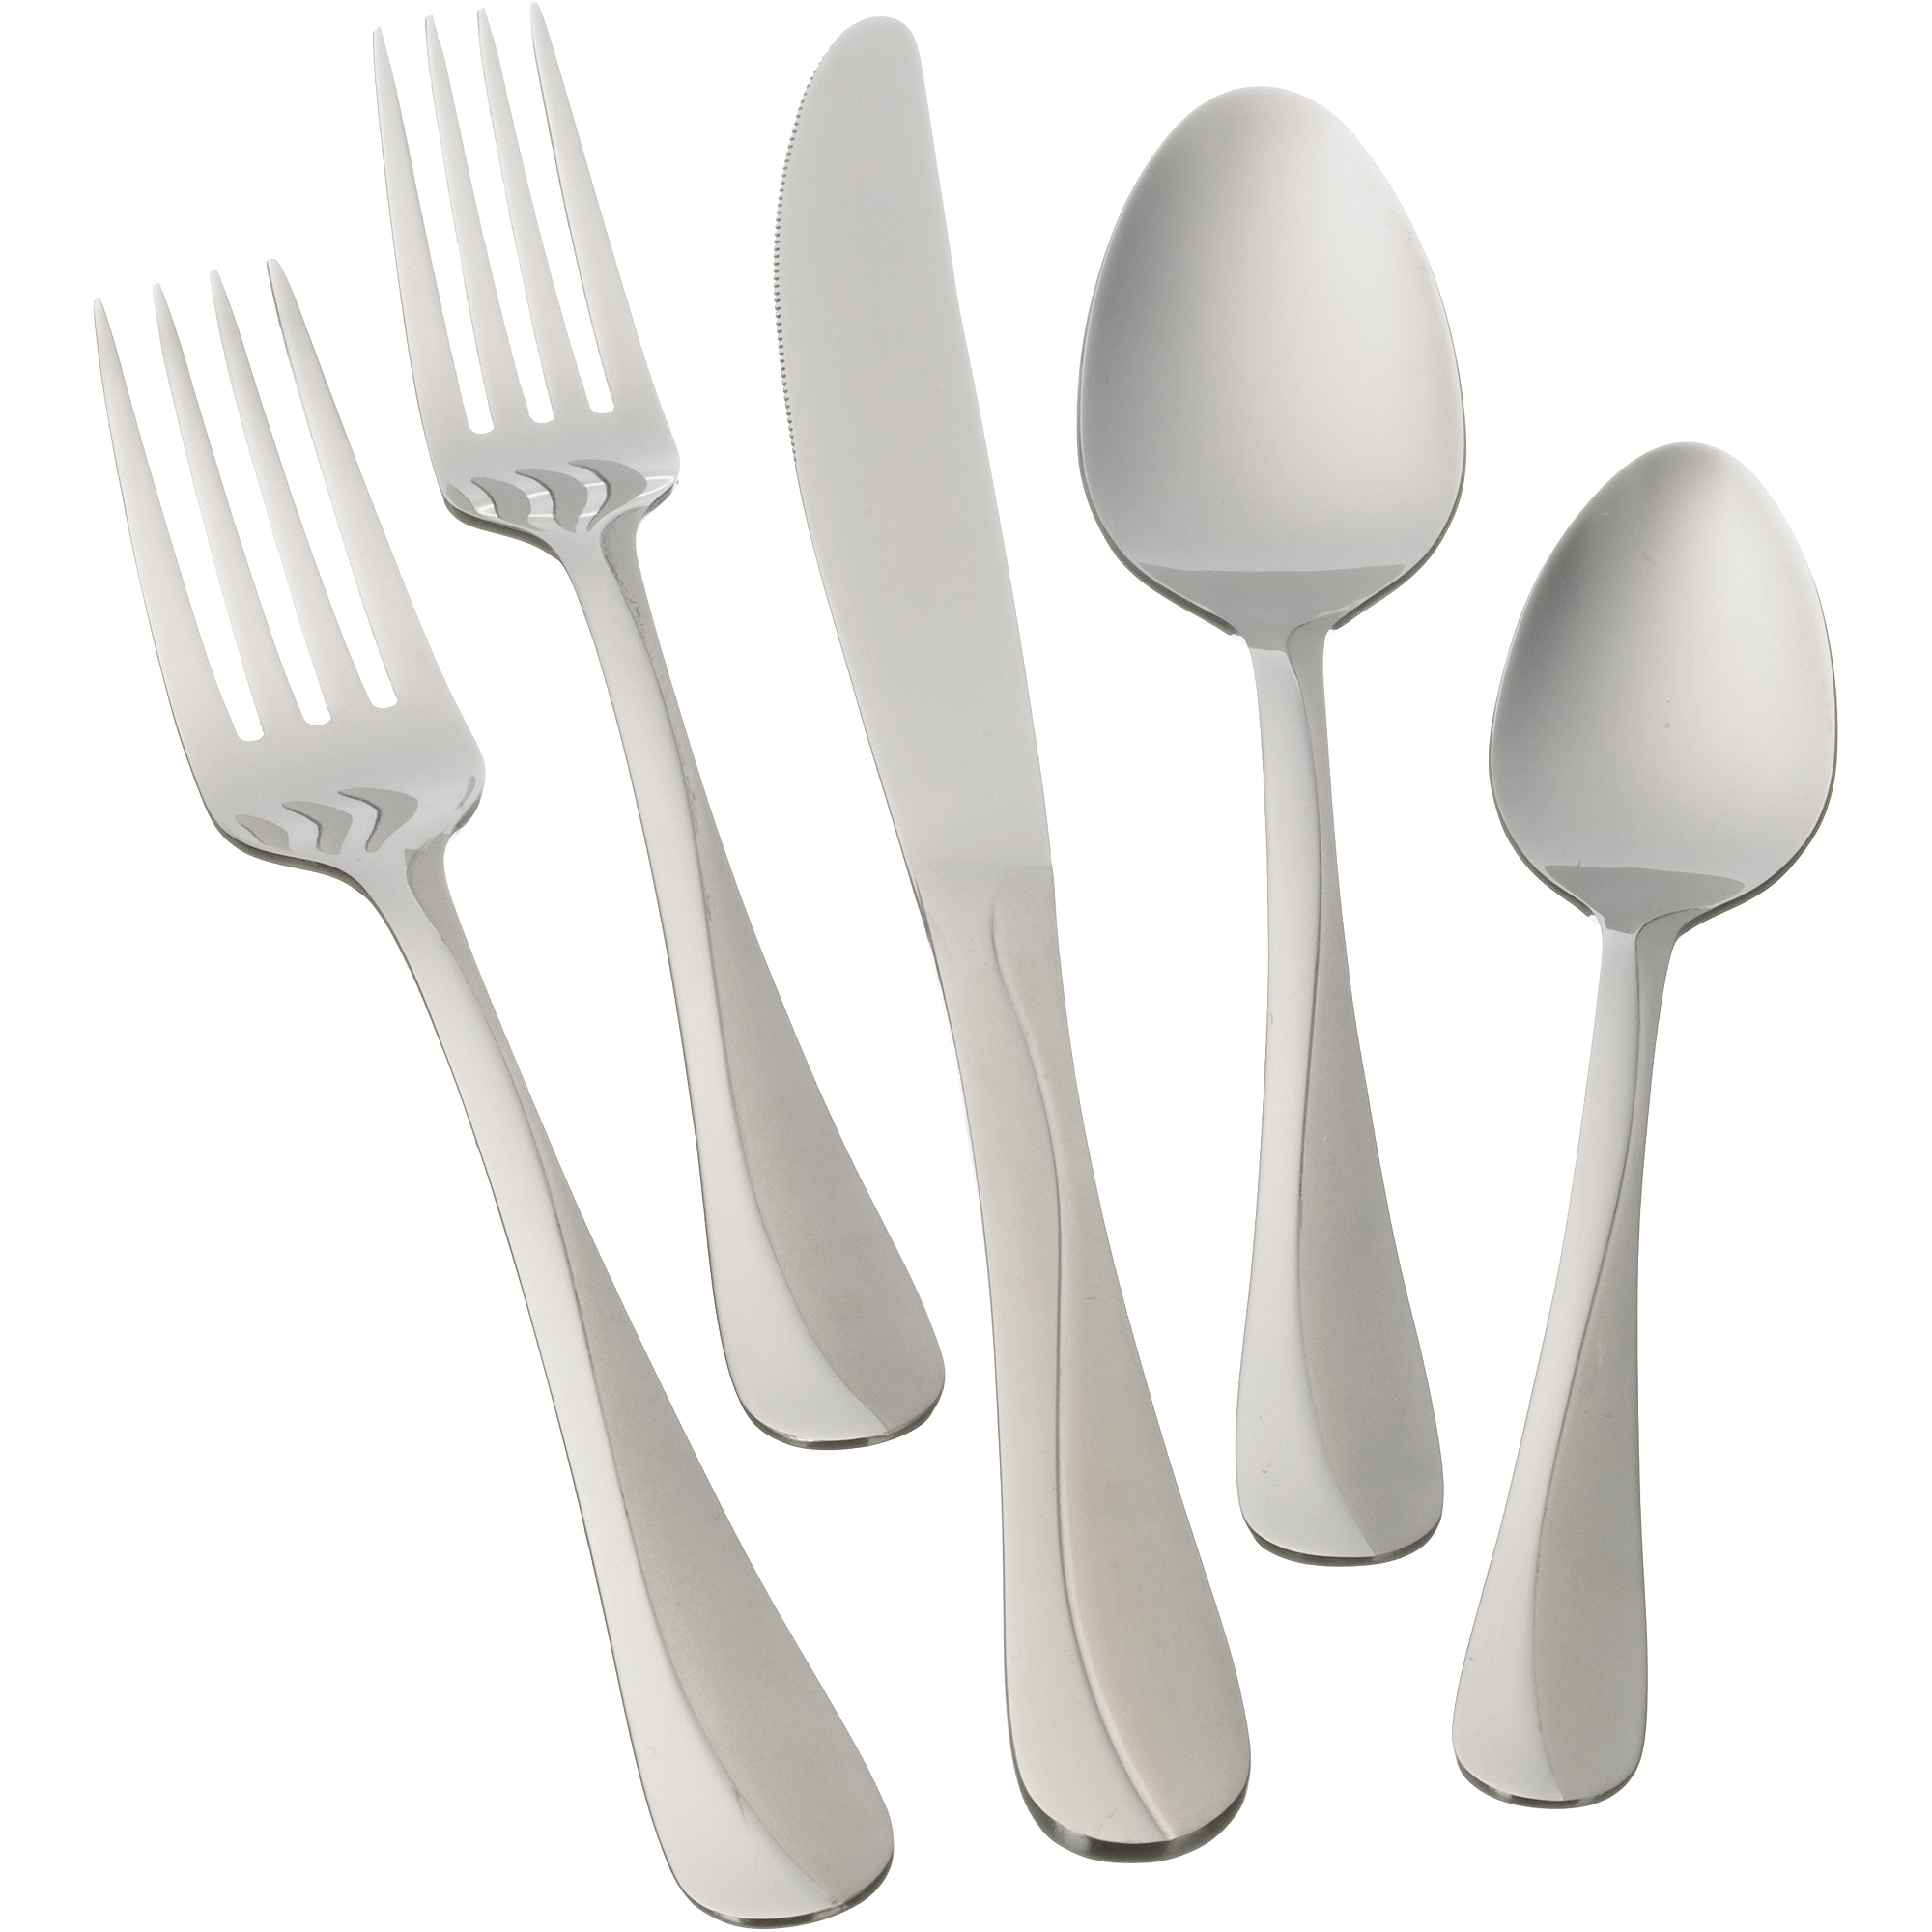 Mainstays Whitney 20 Piece Stainless Steel Flatware Set, Silver Tableware - image 1 of 8